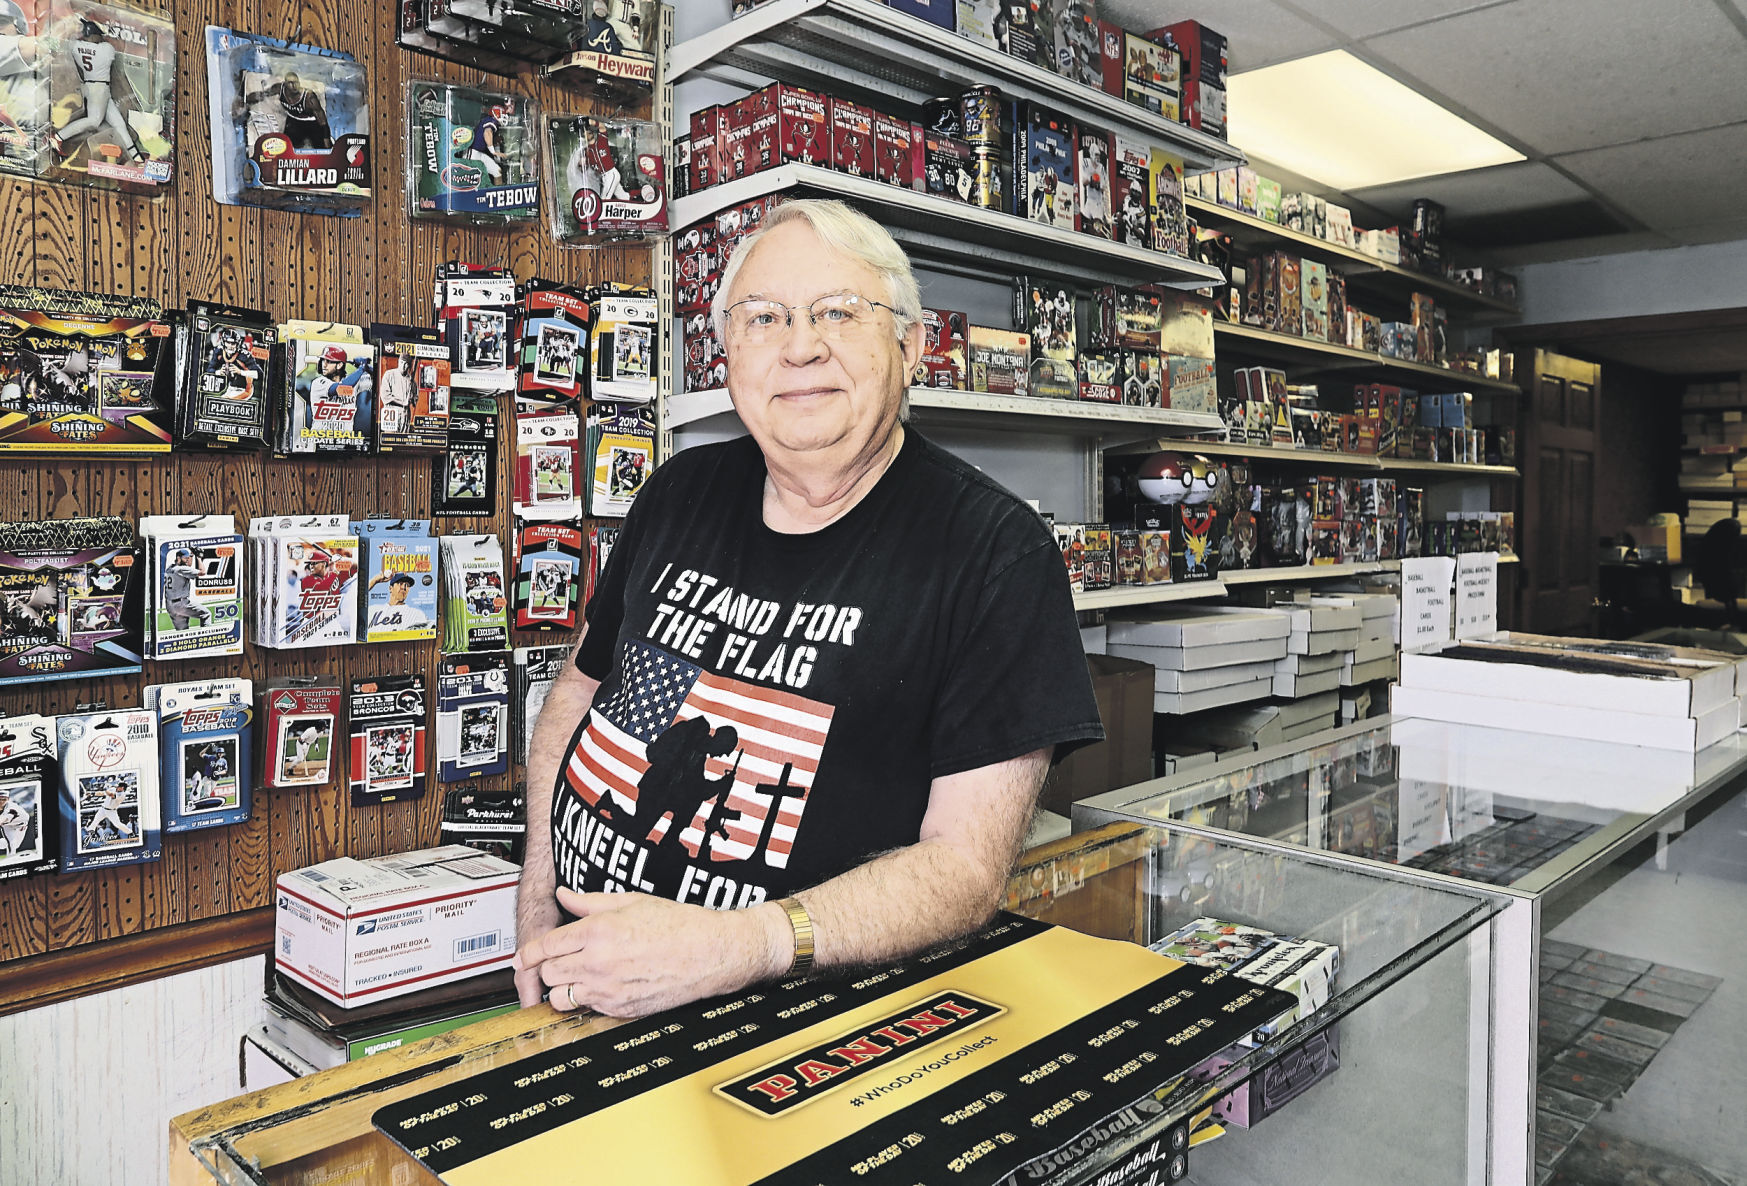 Tri-State Baseball Cards & Shows owner David Orr displays some of his cards and collectibles. The sports card industry has grown over the past year, and Orr said that was true at his Dubuque store. PHOTO CREDIT: Stephen Gassman